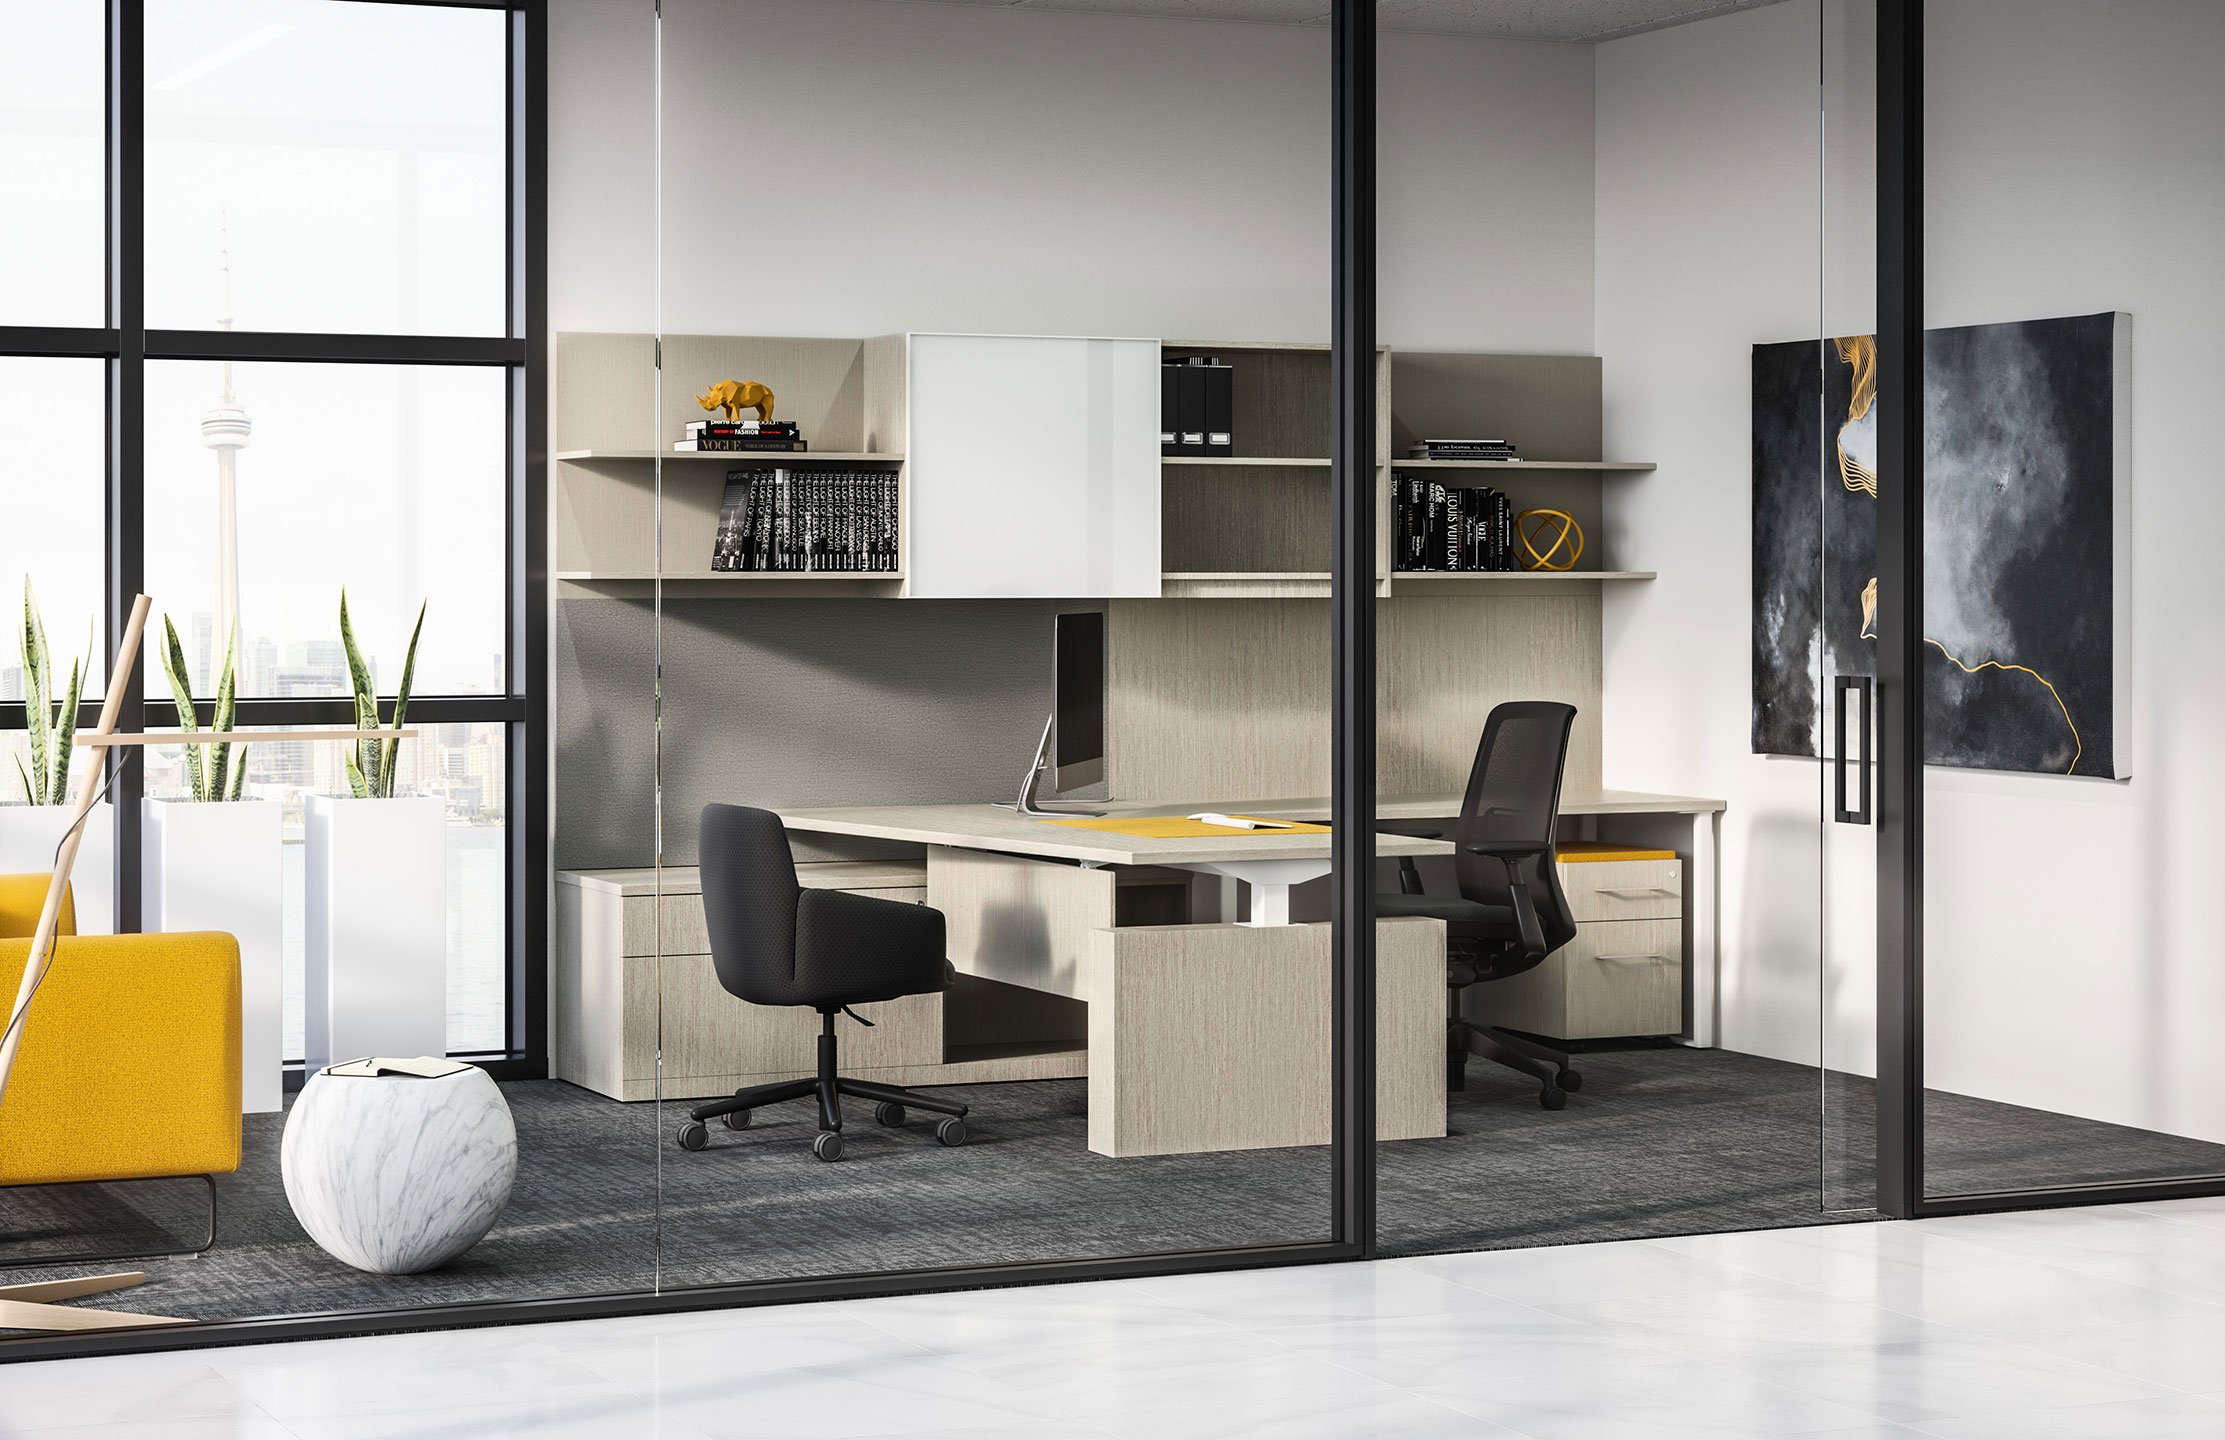 Haworth Masters Series Workspace in closed office space with glass walls with black chairs and apple desktop on height adjustable desk